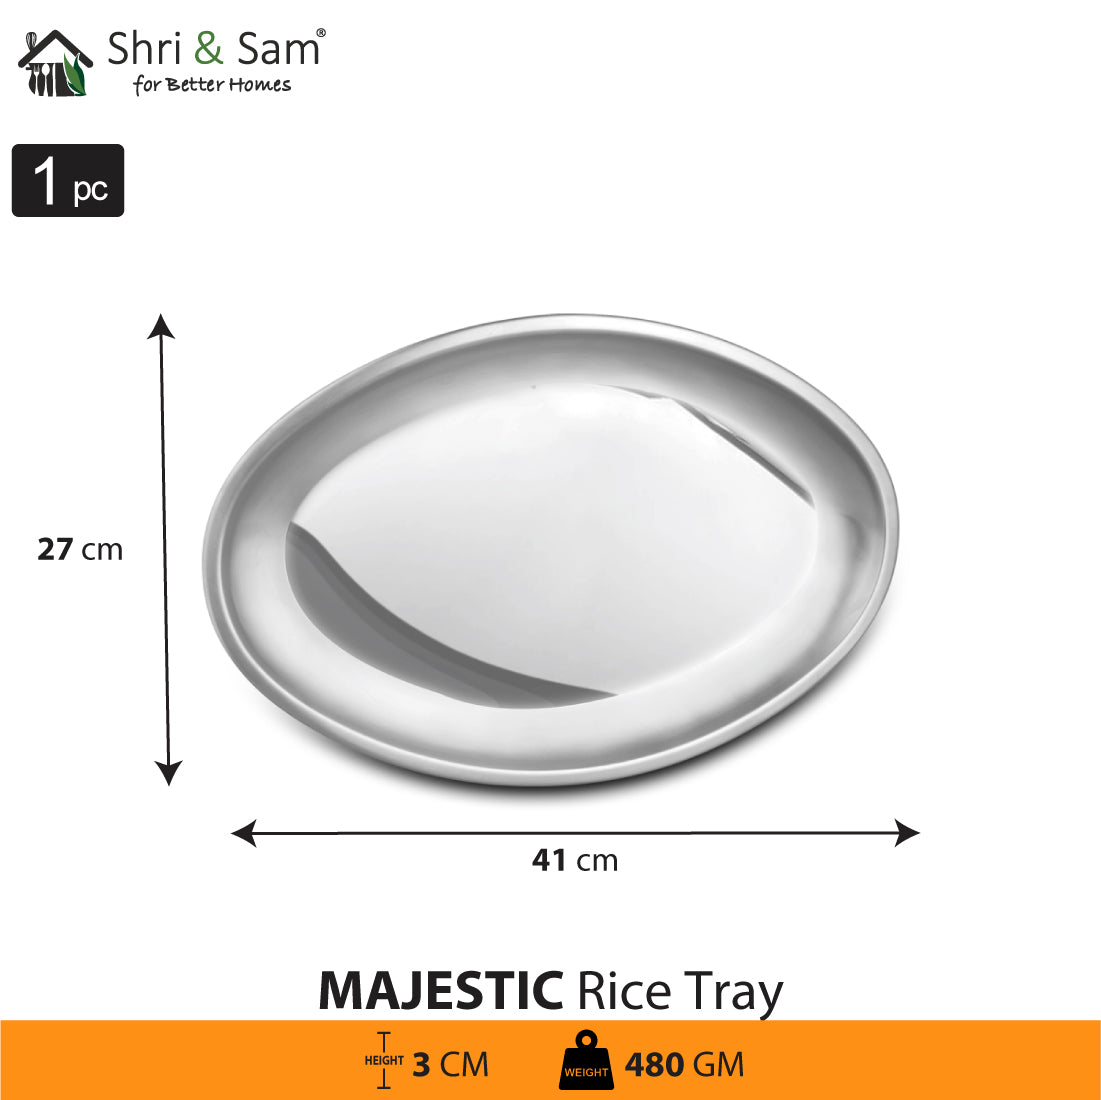 Stainless Steel Rice Tray Majestic